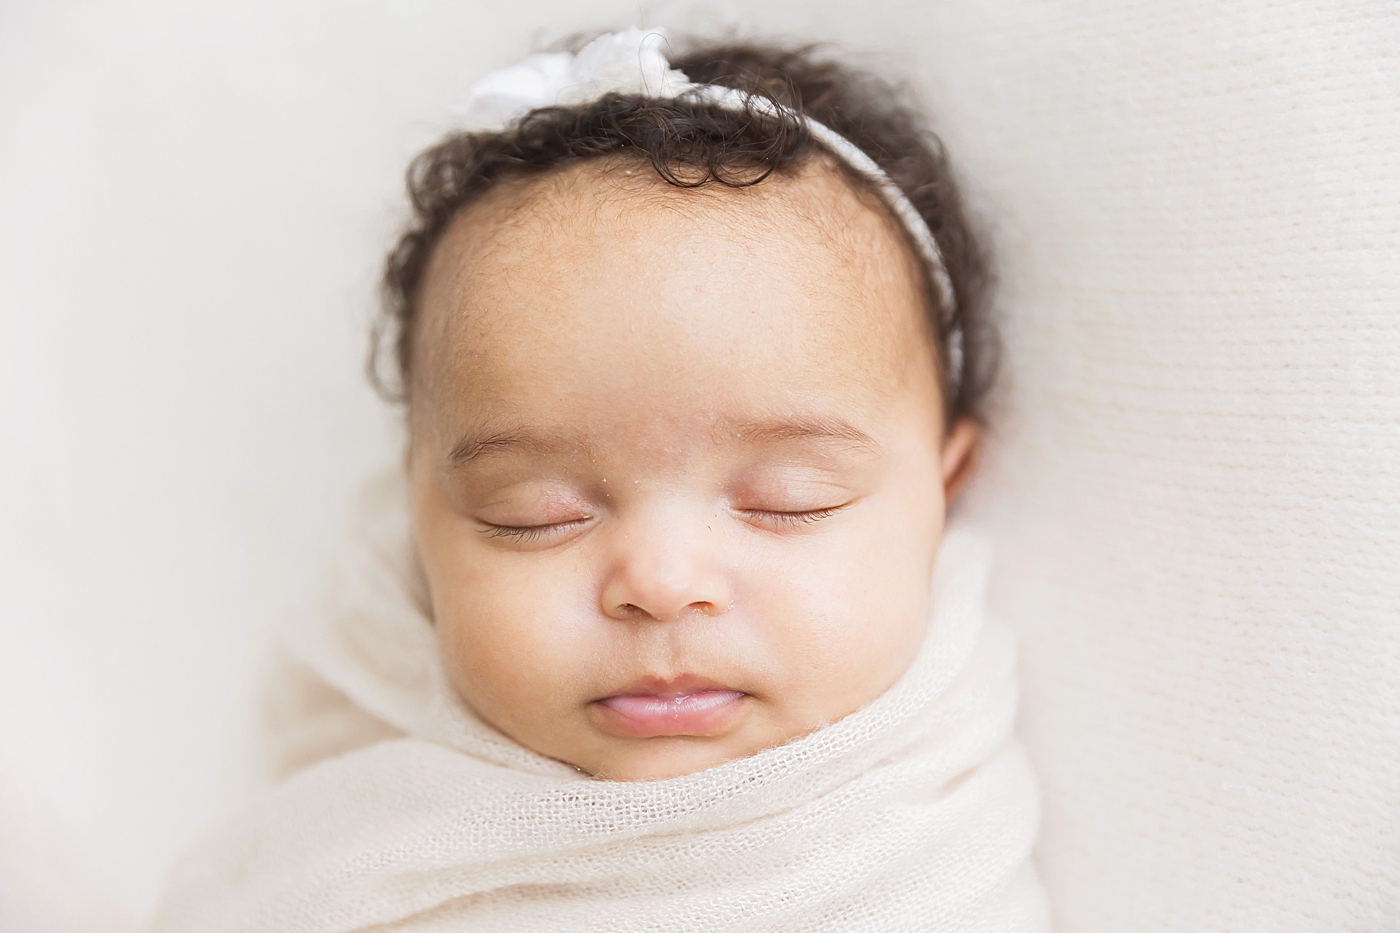 Baby girl sleeping for newborn photos at six weeks old in studio with Fresh Light Photography.